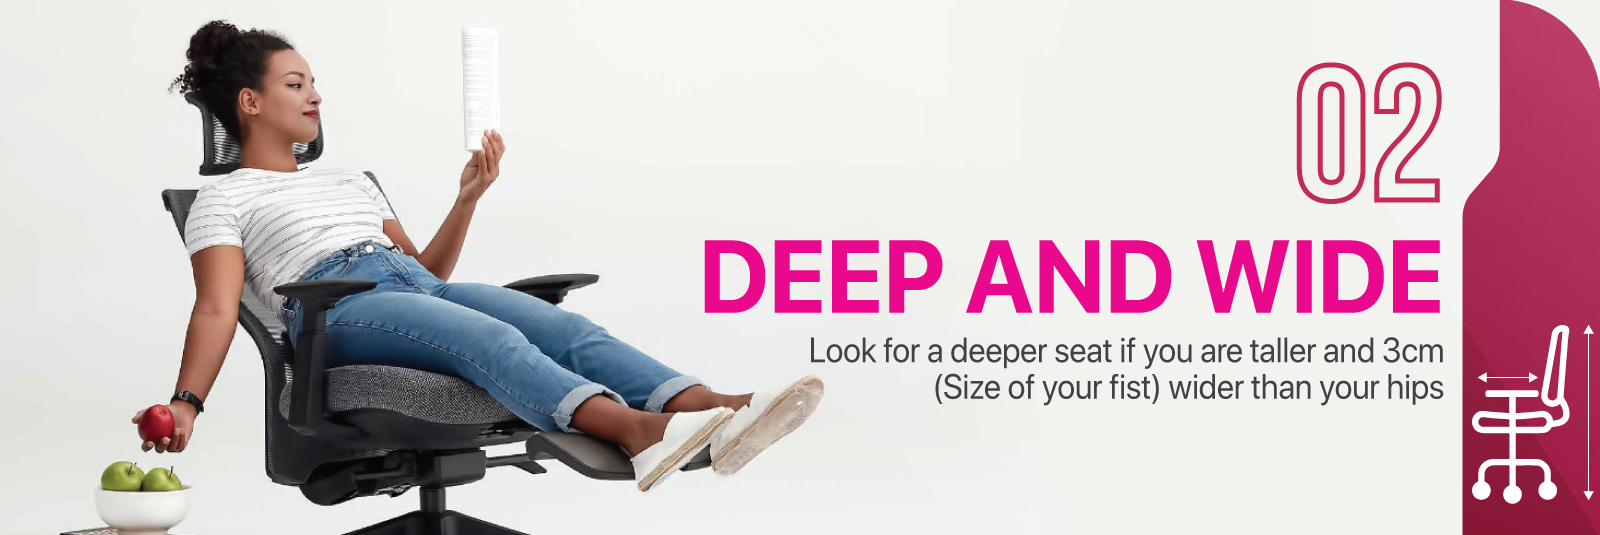 Deep and Wide - Look for a deeper seat if you are taller and 3cm (size of your fist) wider than your hips.